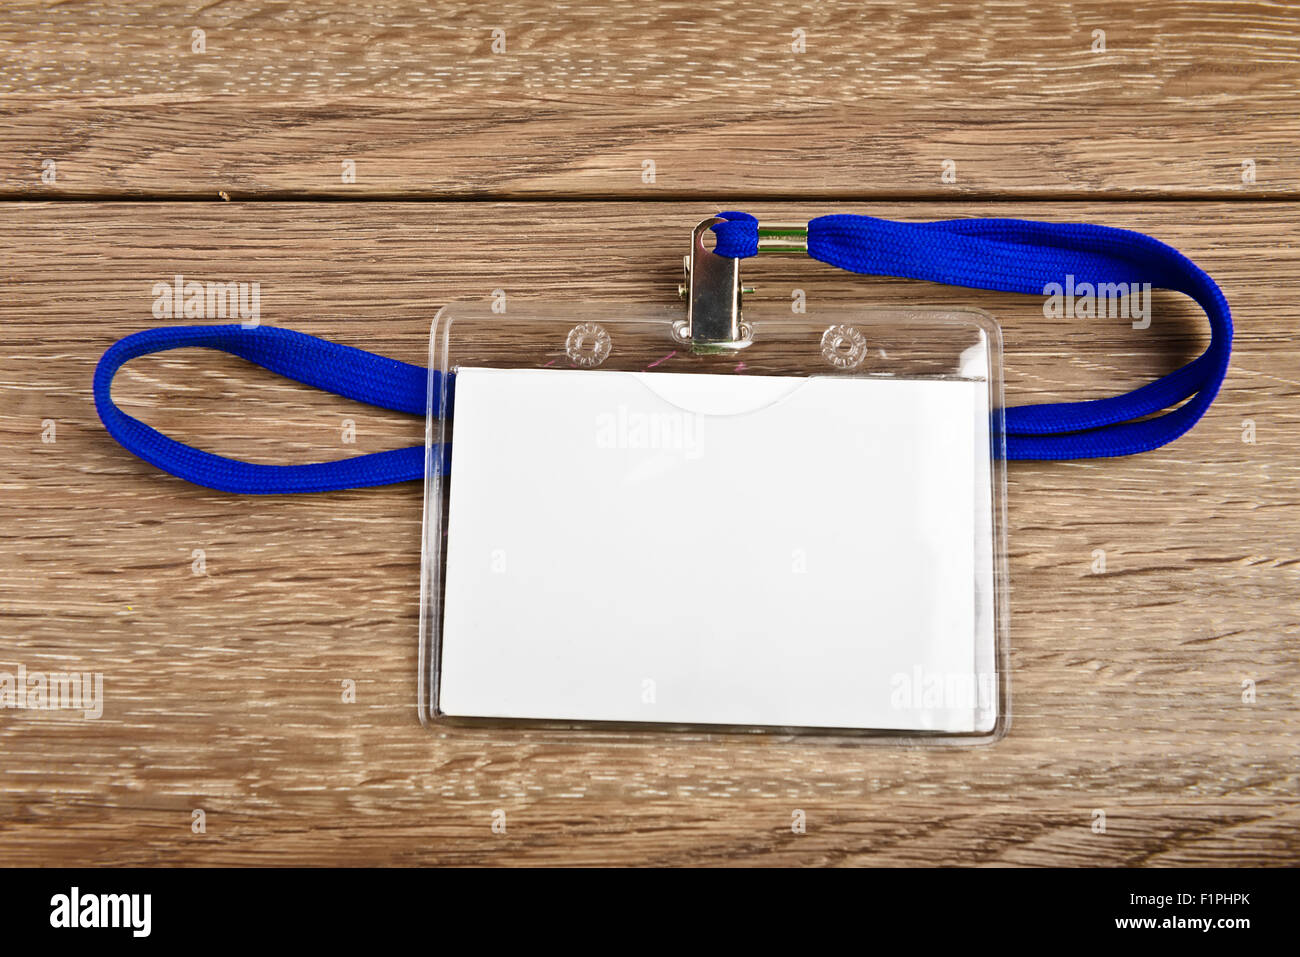 Name id card badge with cord (rope) on wooden table Stock Photo